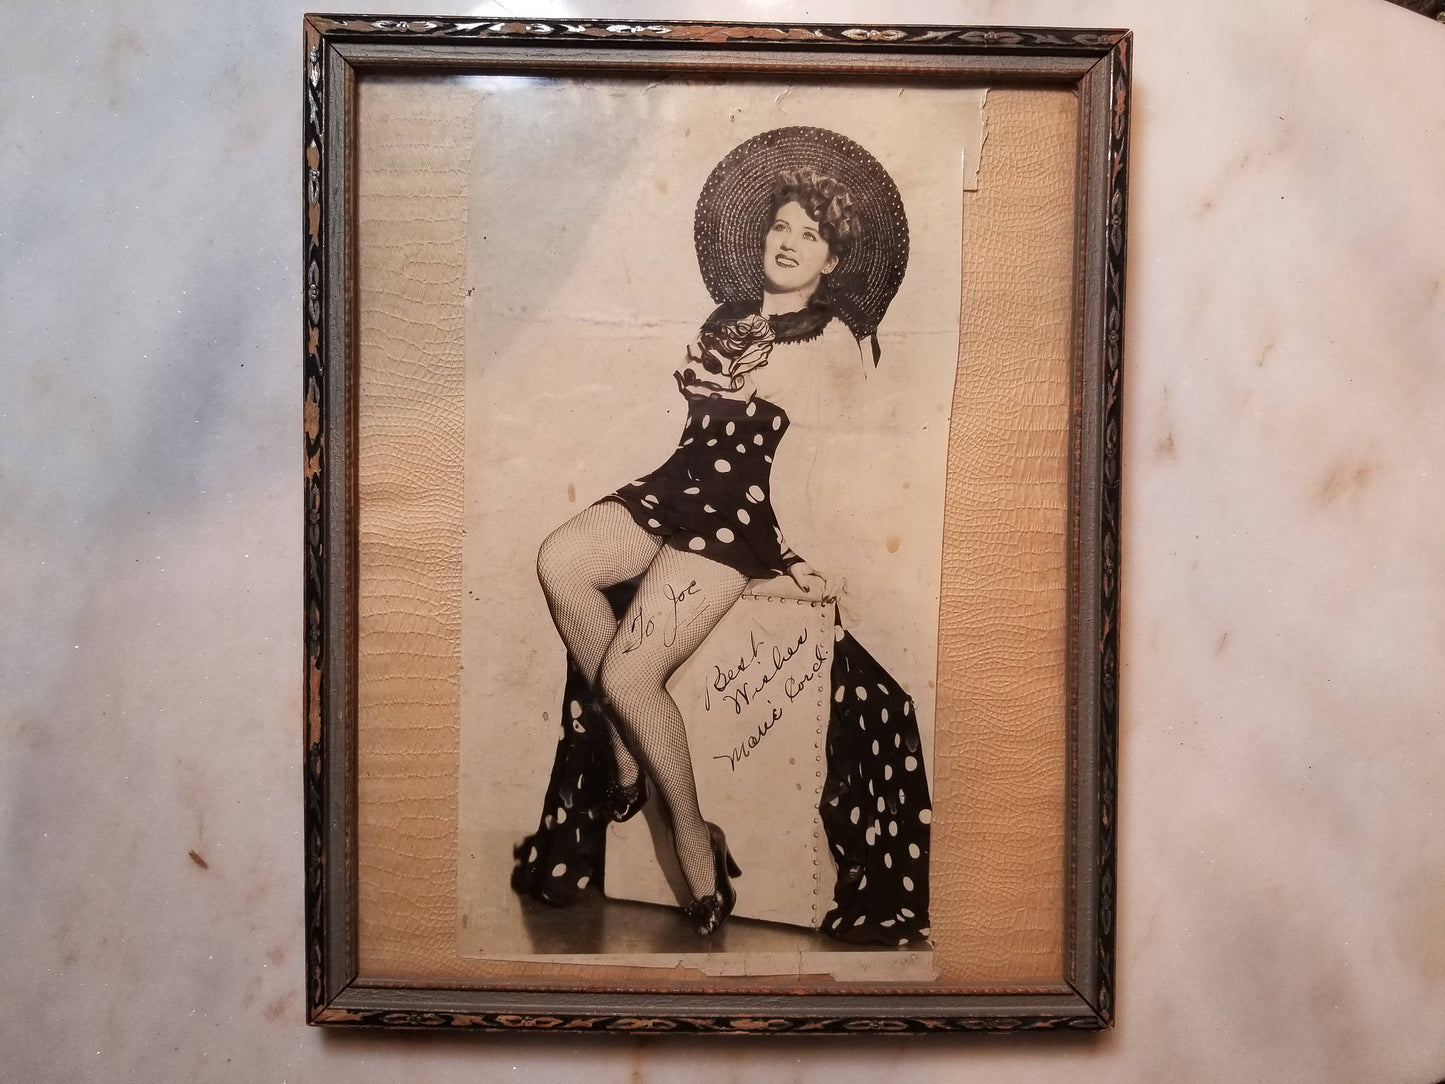 Framed Autographed Photograph of Burlesque Dancer Marie Cord, Given to "Chicken Joe"